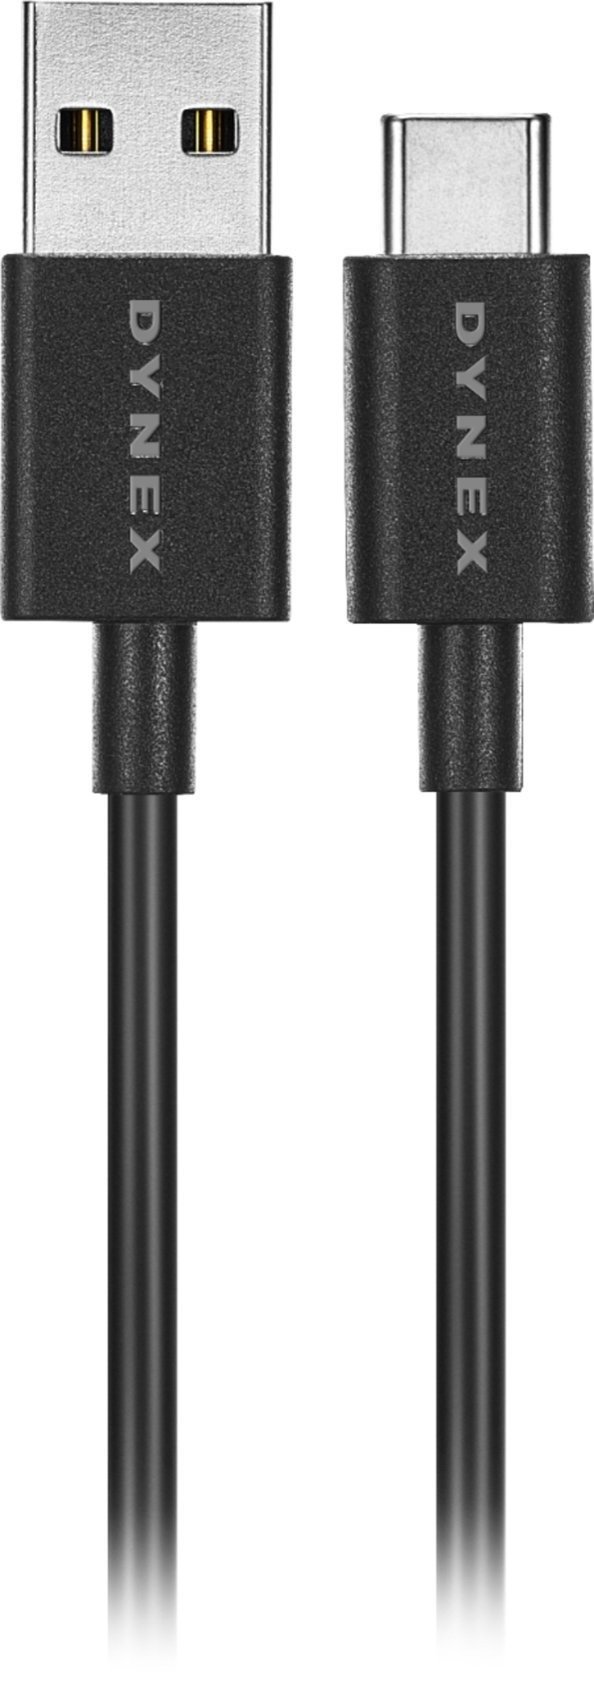 2-Pack 3' Dynex USB Type C-to-USB Type A